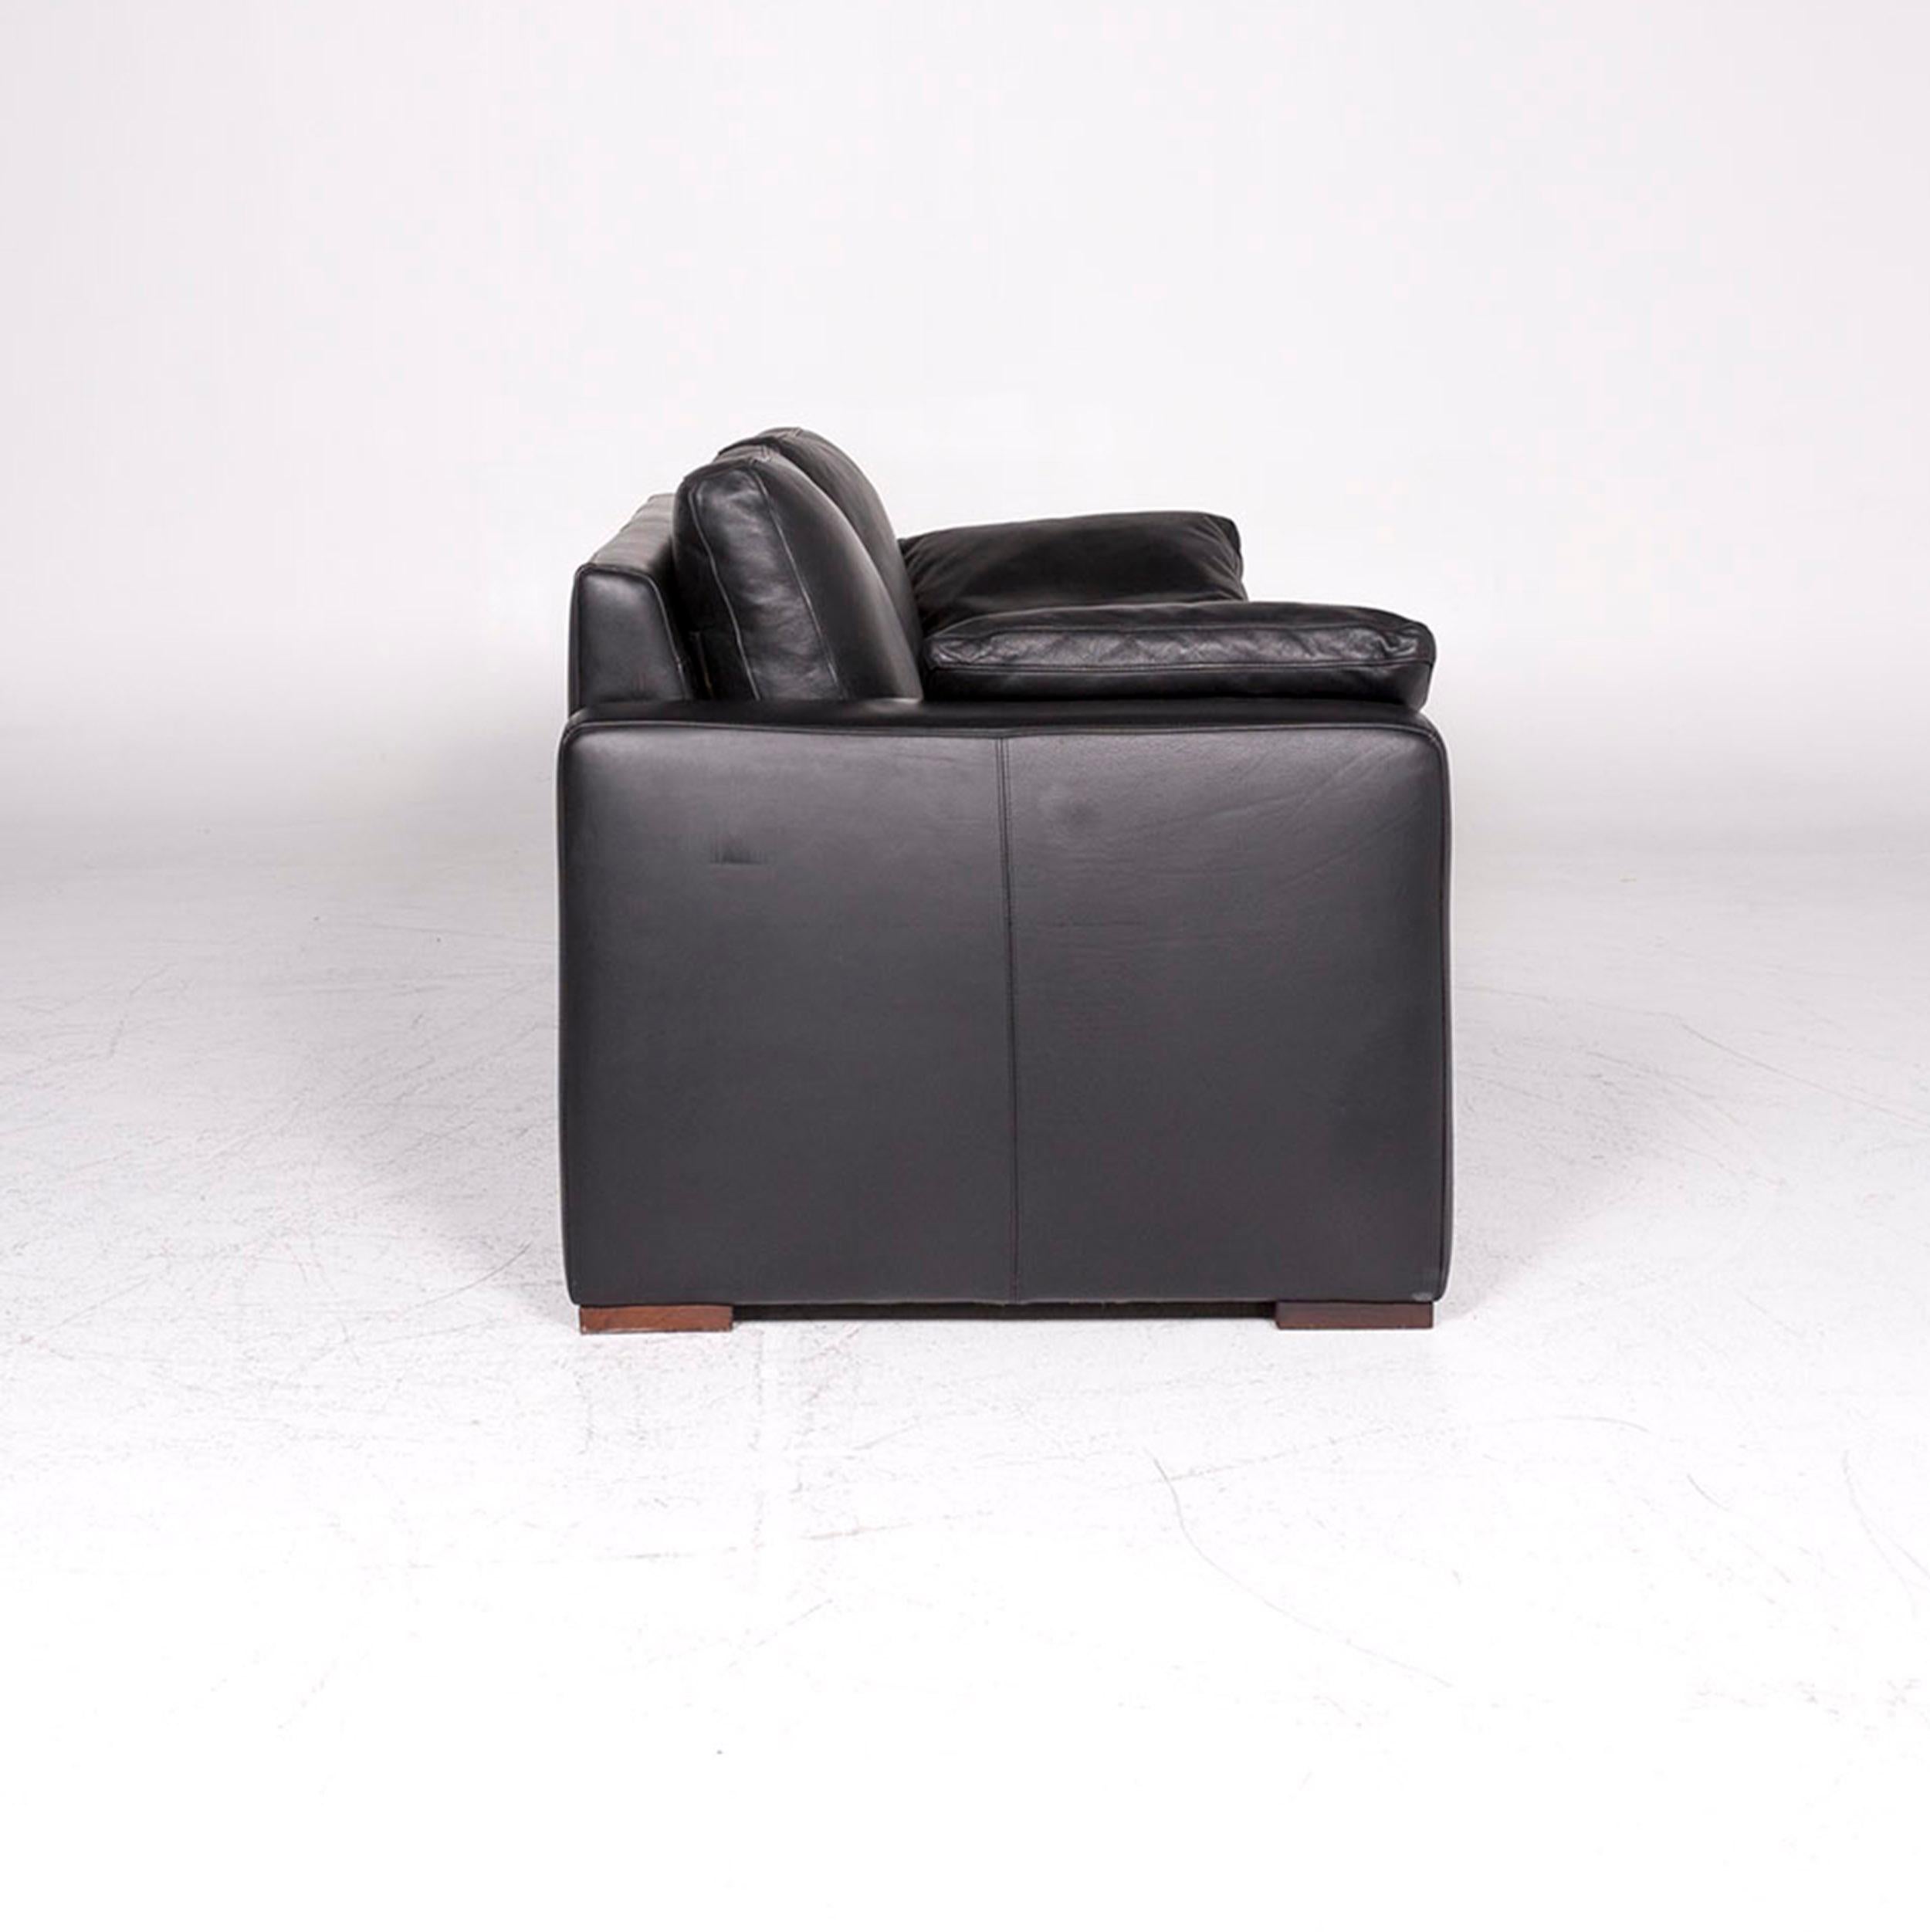 Machalke Designer Leather Sofa Black Two-Seat Couch For Sale 2